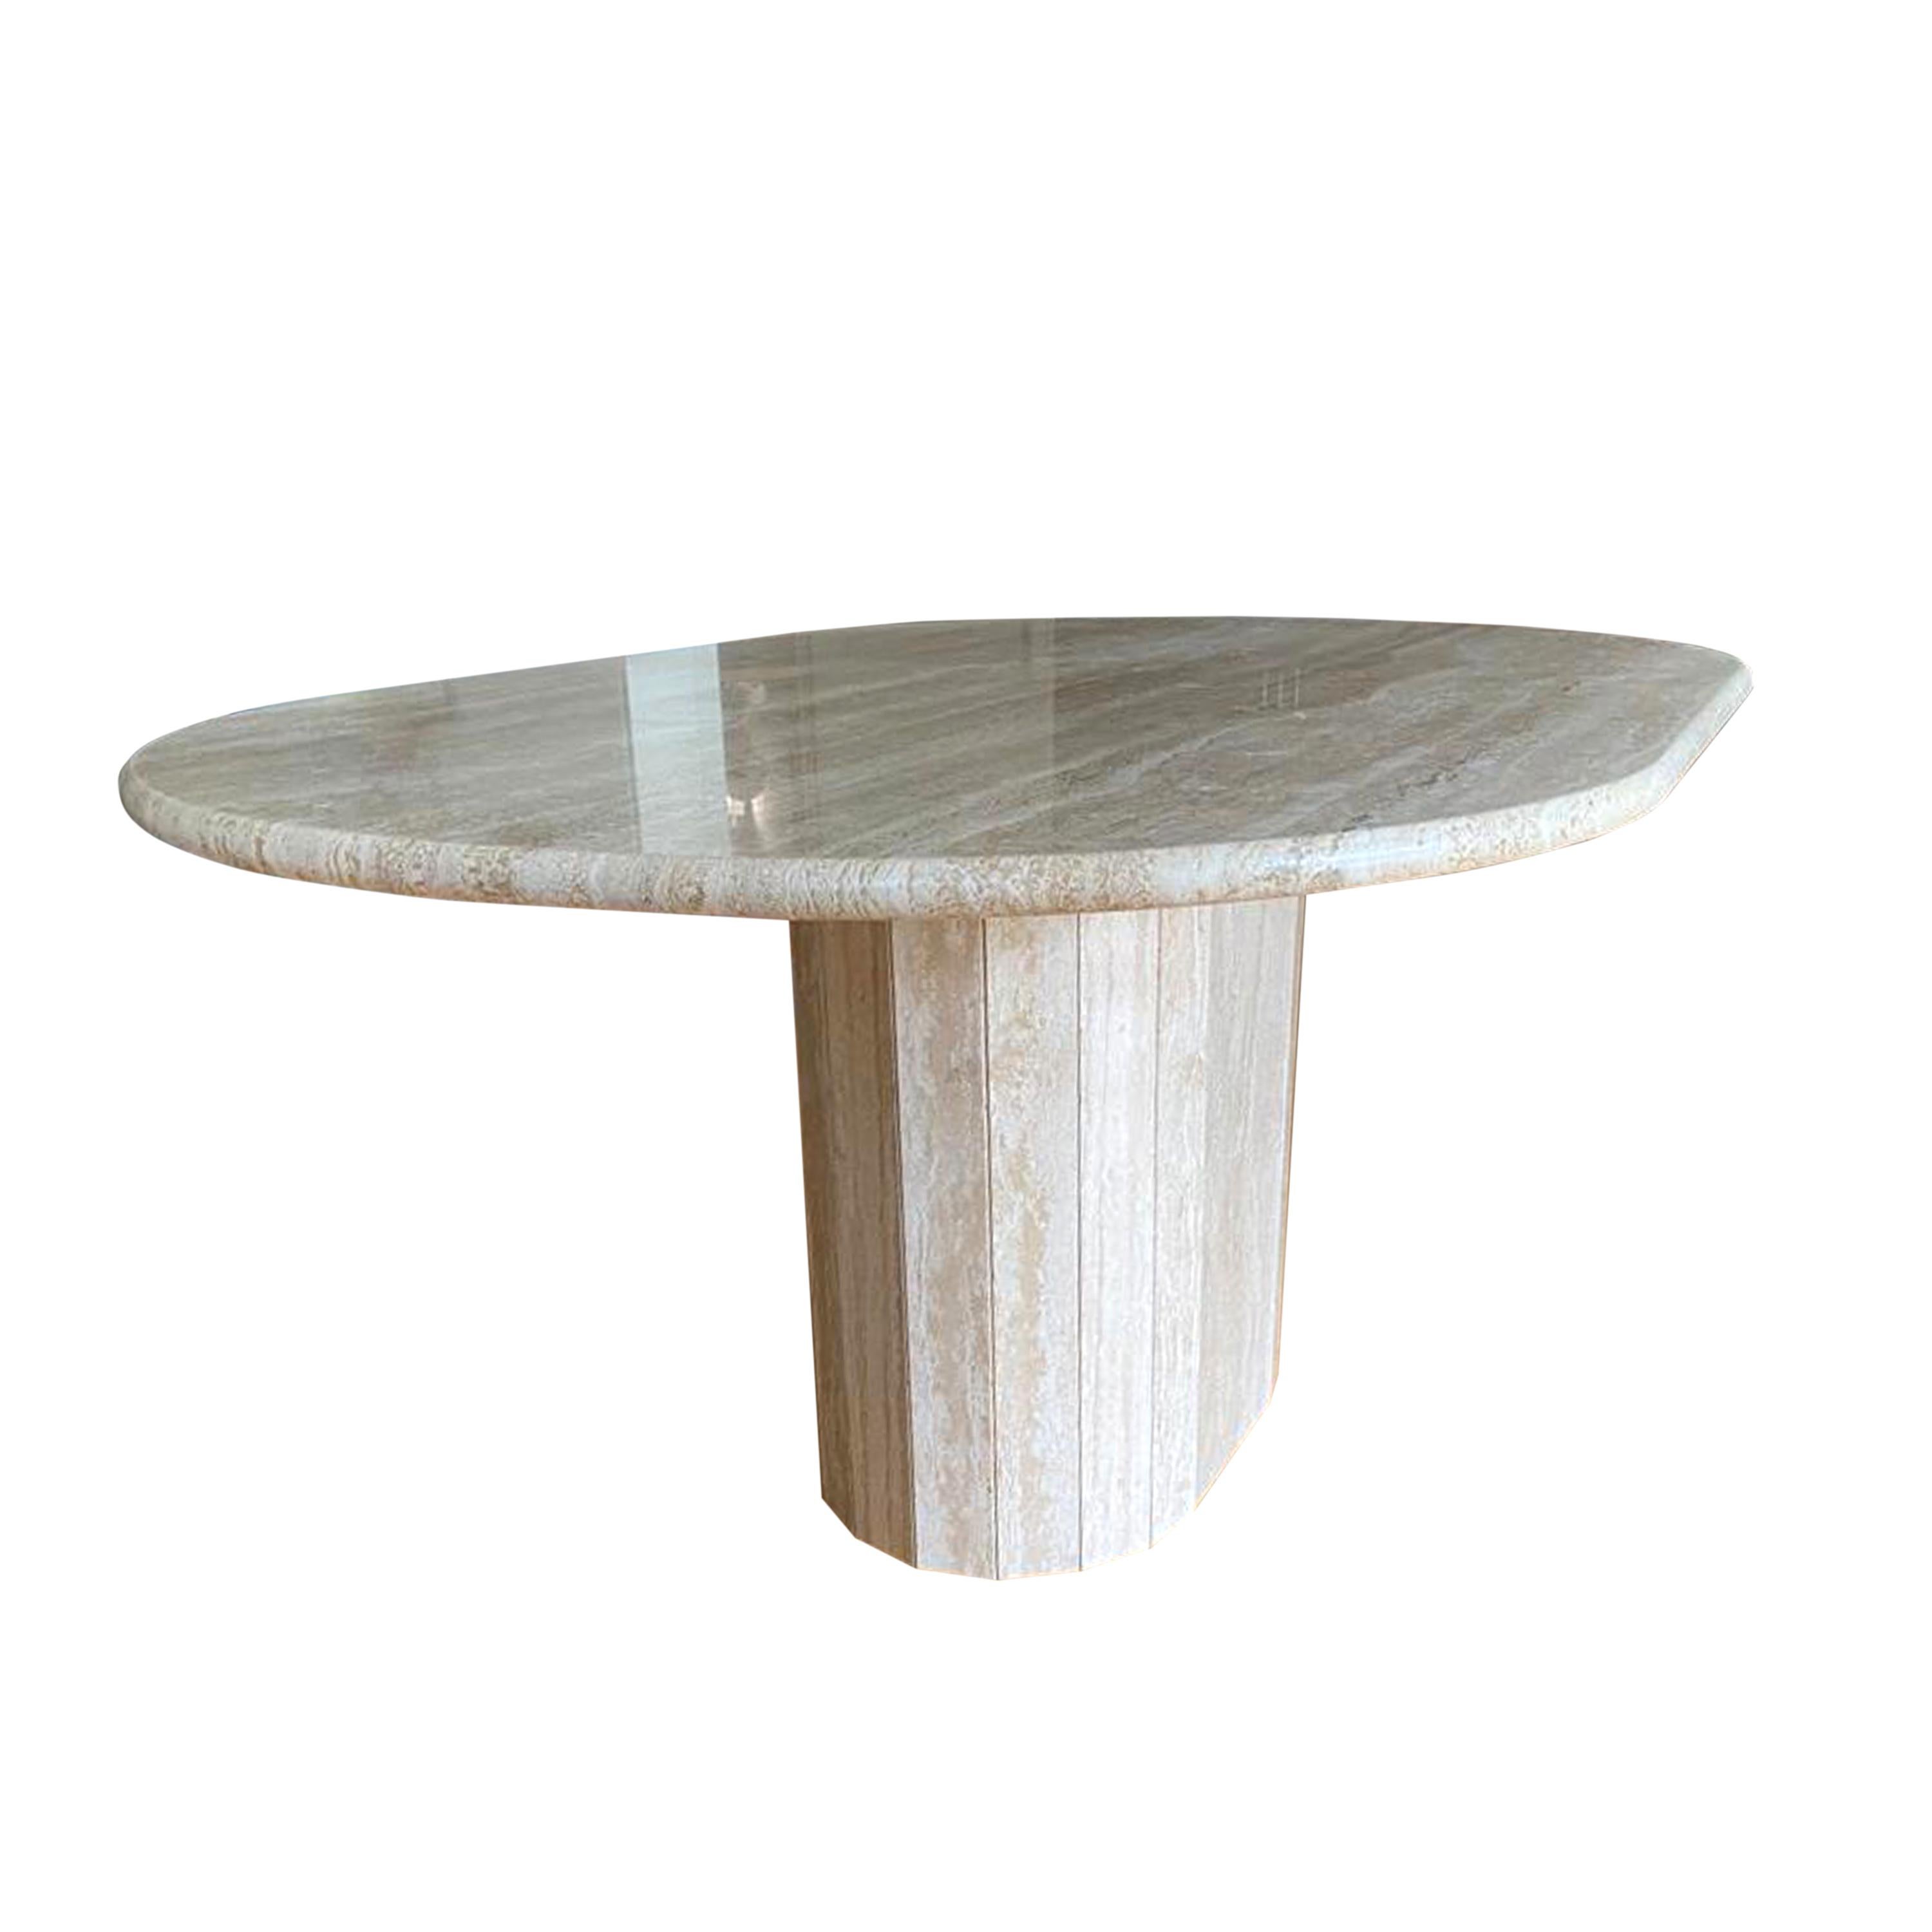 Oval dining table in soft cream italian travertine.
The oval top, thick and rounded on the edge, is resting on a facetted pedestal, also made of travertine.
This is a very adaptive format, sitting 4, 6 or 8 guests.
This table was manufactured in